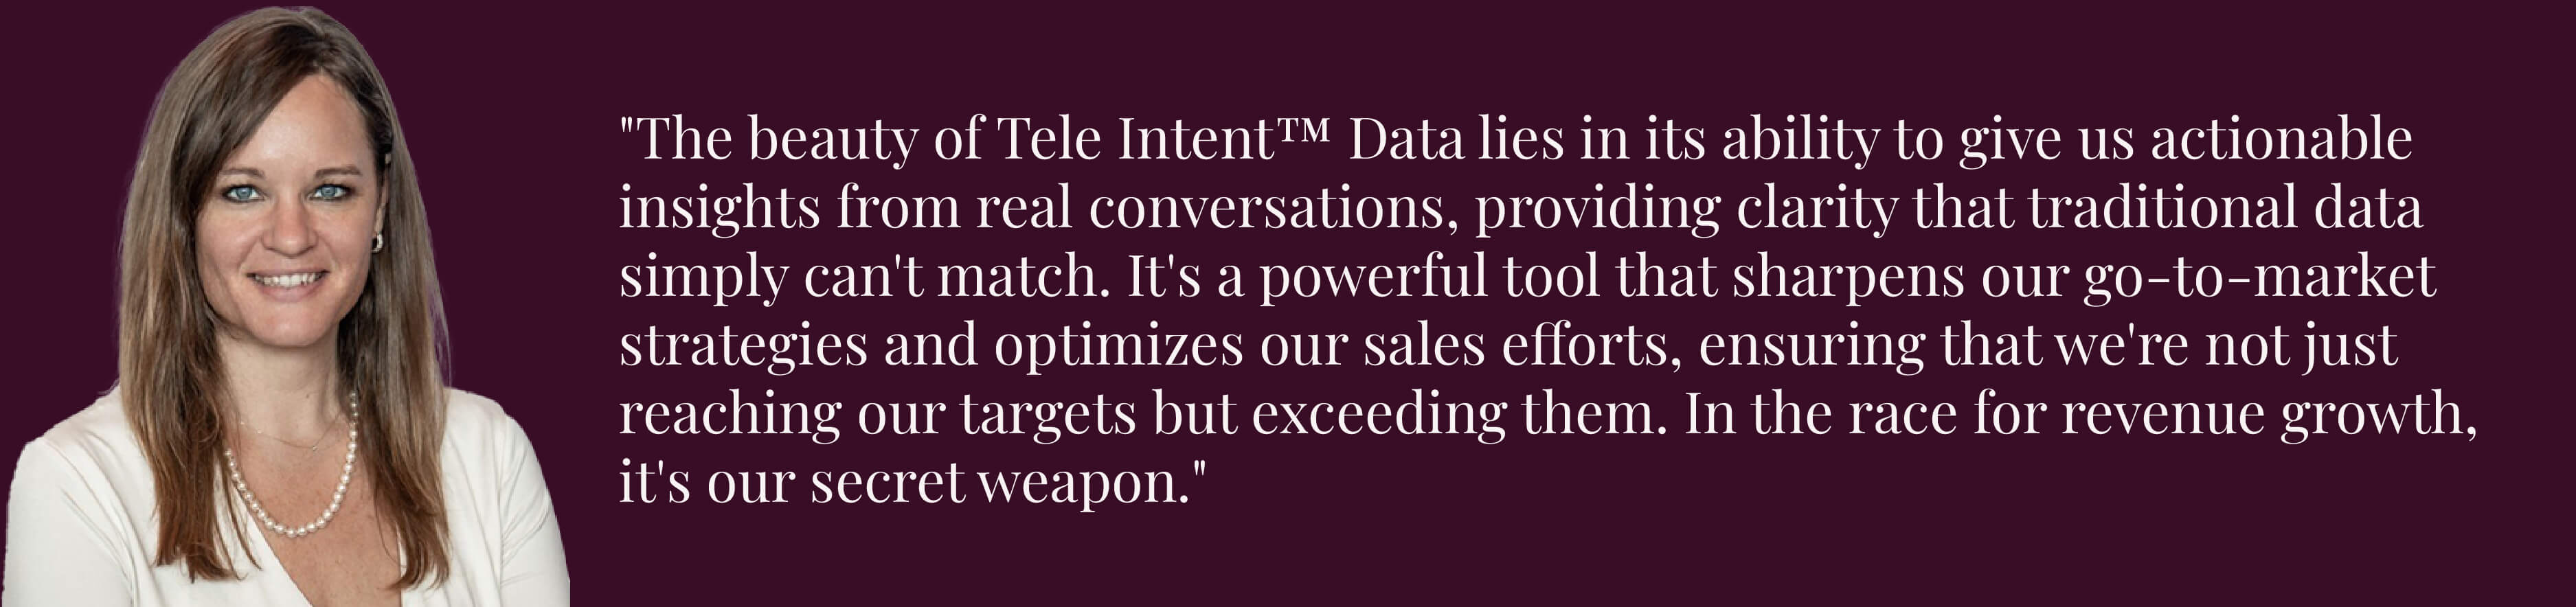 Expert Opinions The Growing Importance of TeleIntent Data in Marketing_ Kelly Kenworthy